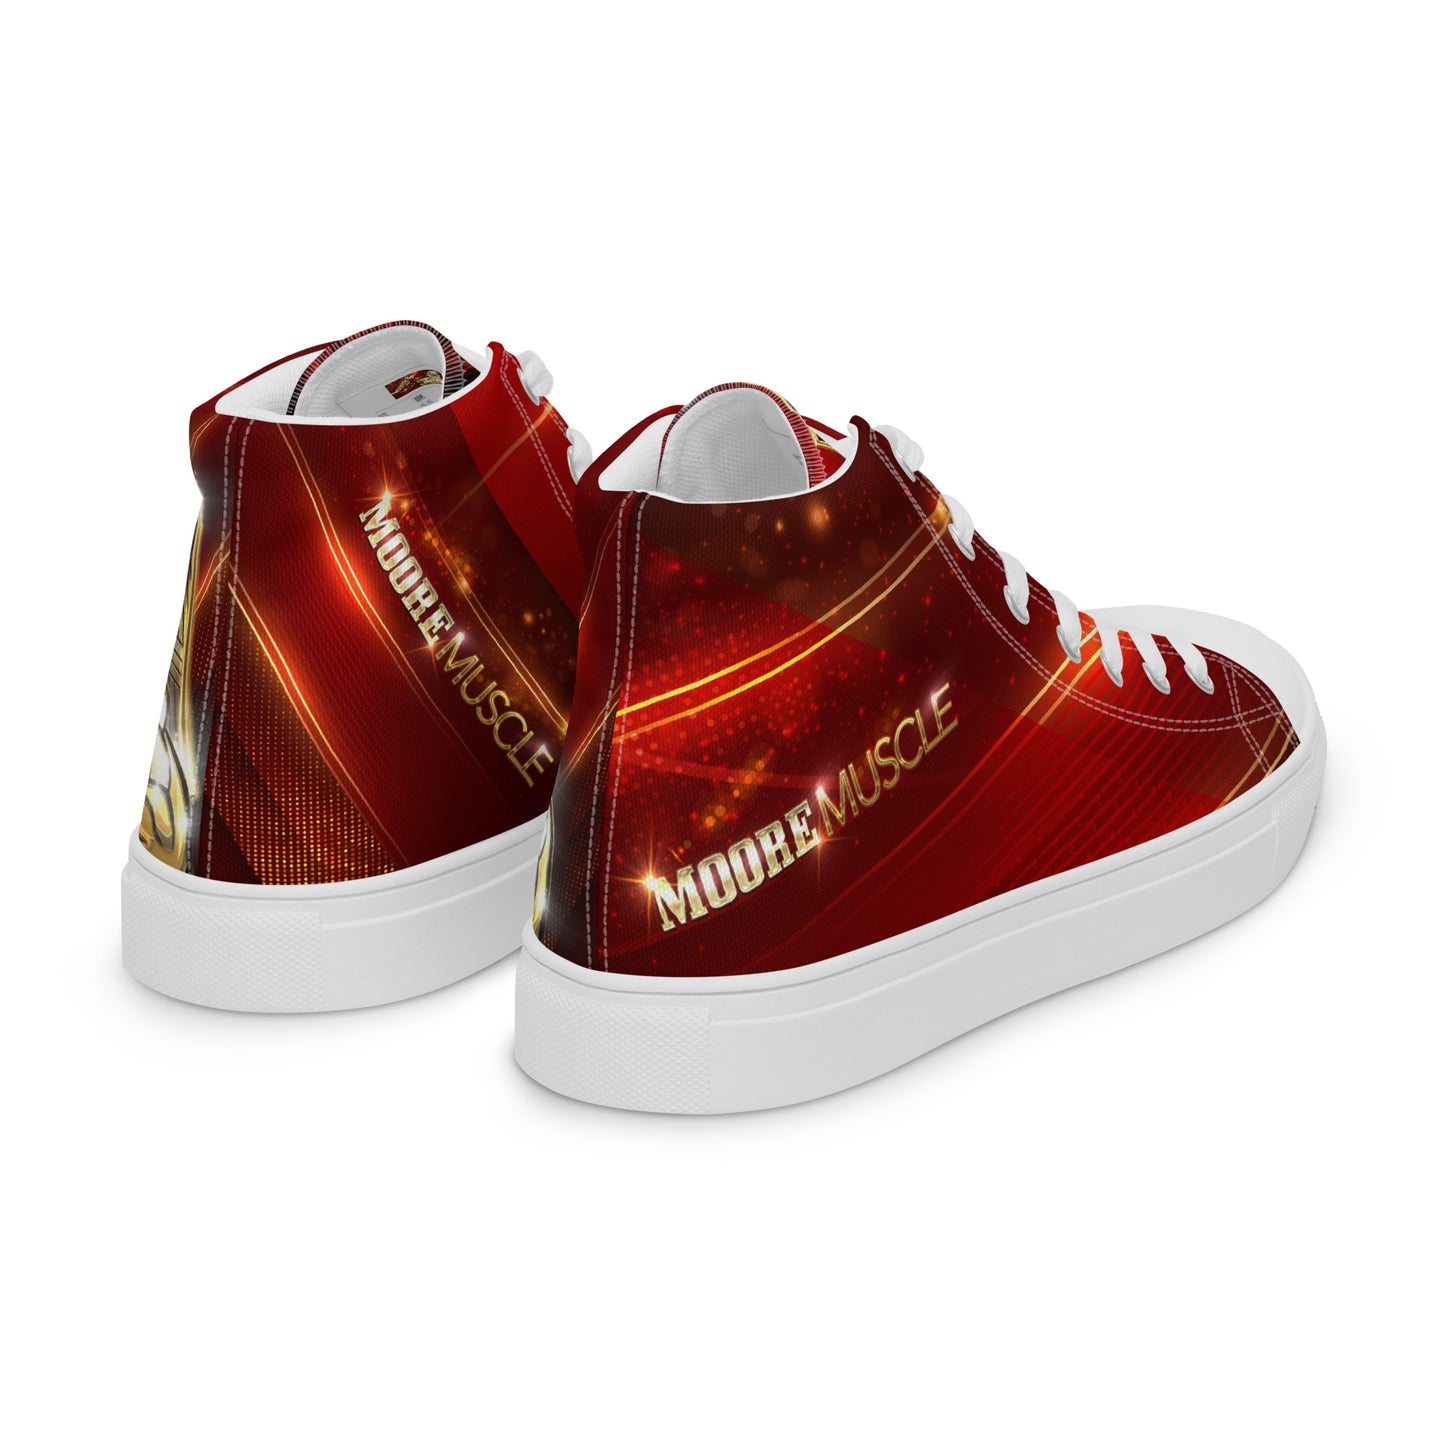 MooreMuscle High Top Red — Women's